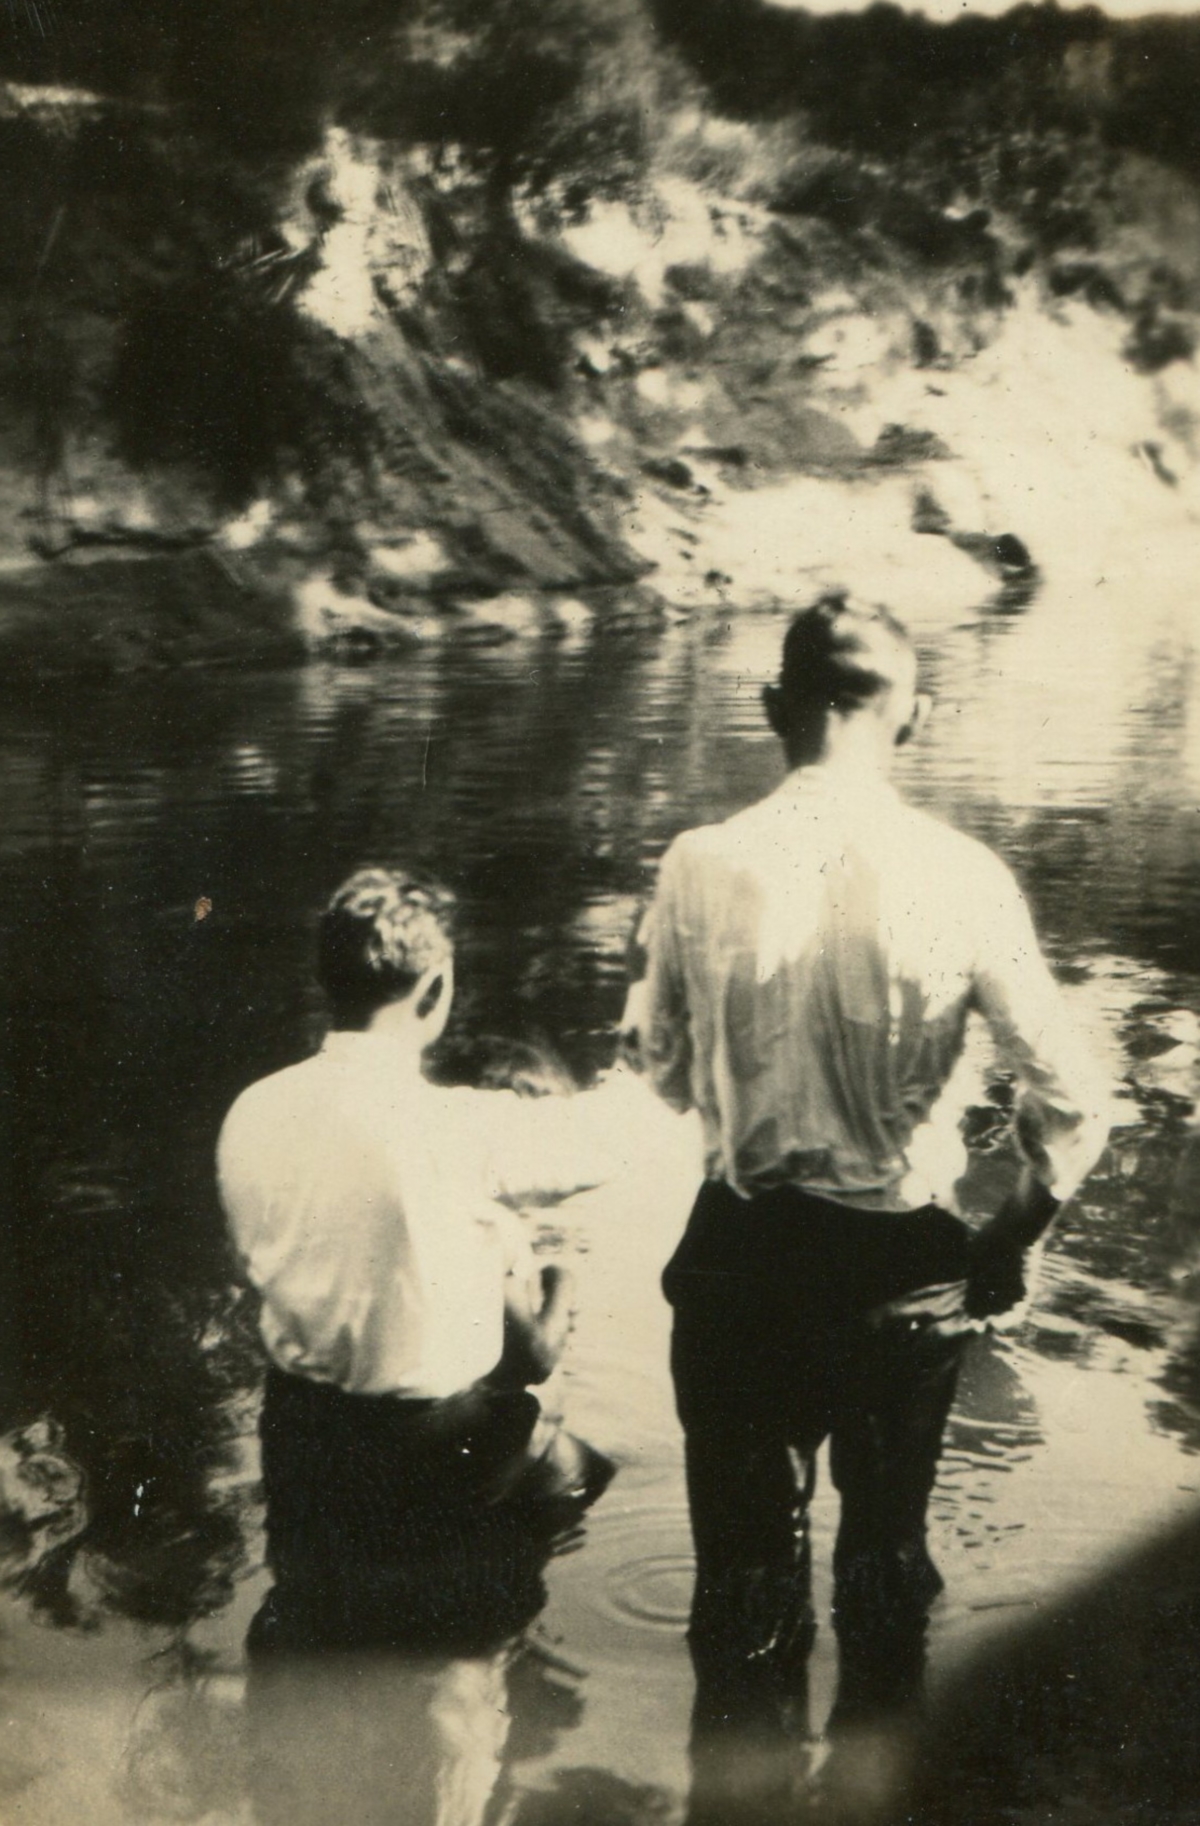 Baptism in Floyd County in 1921